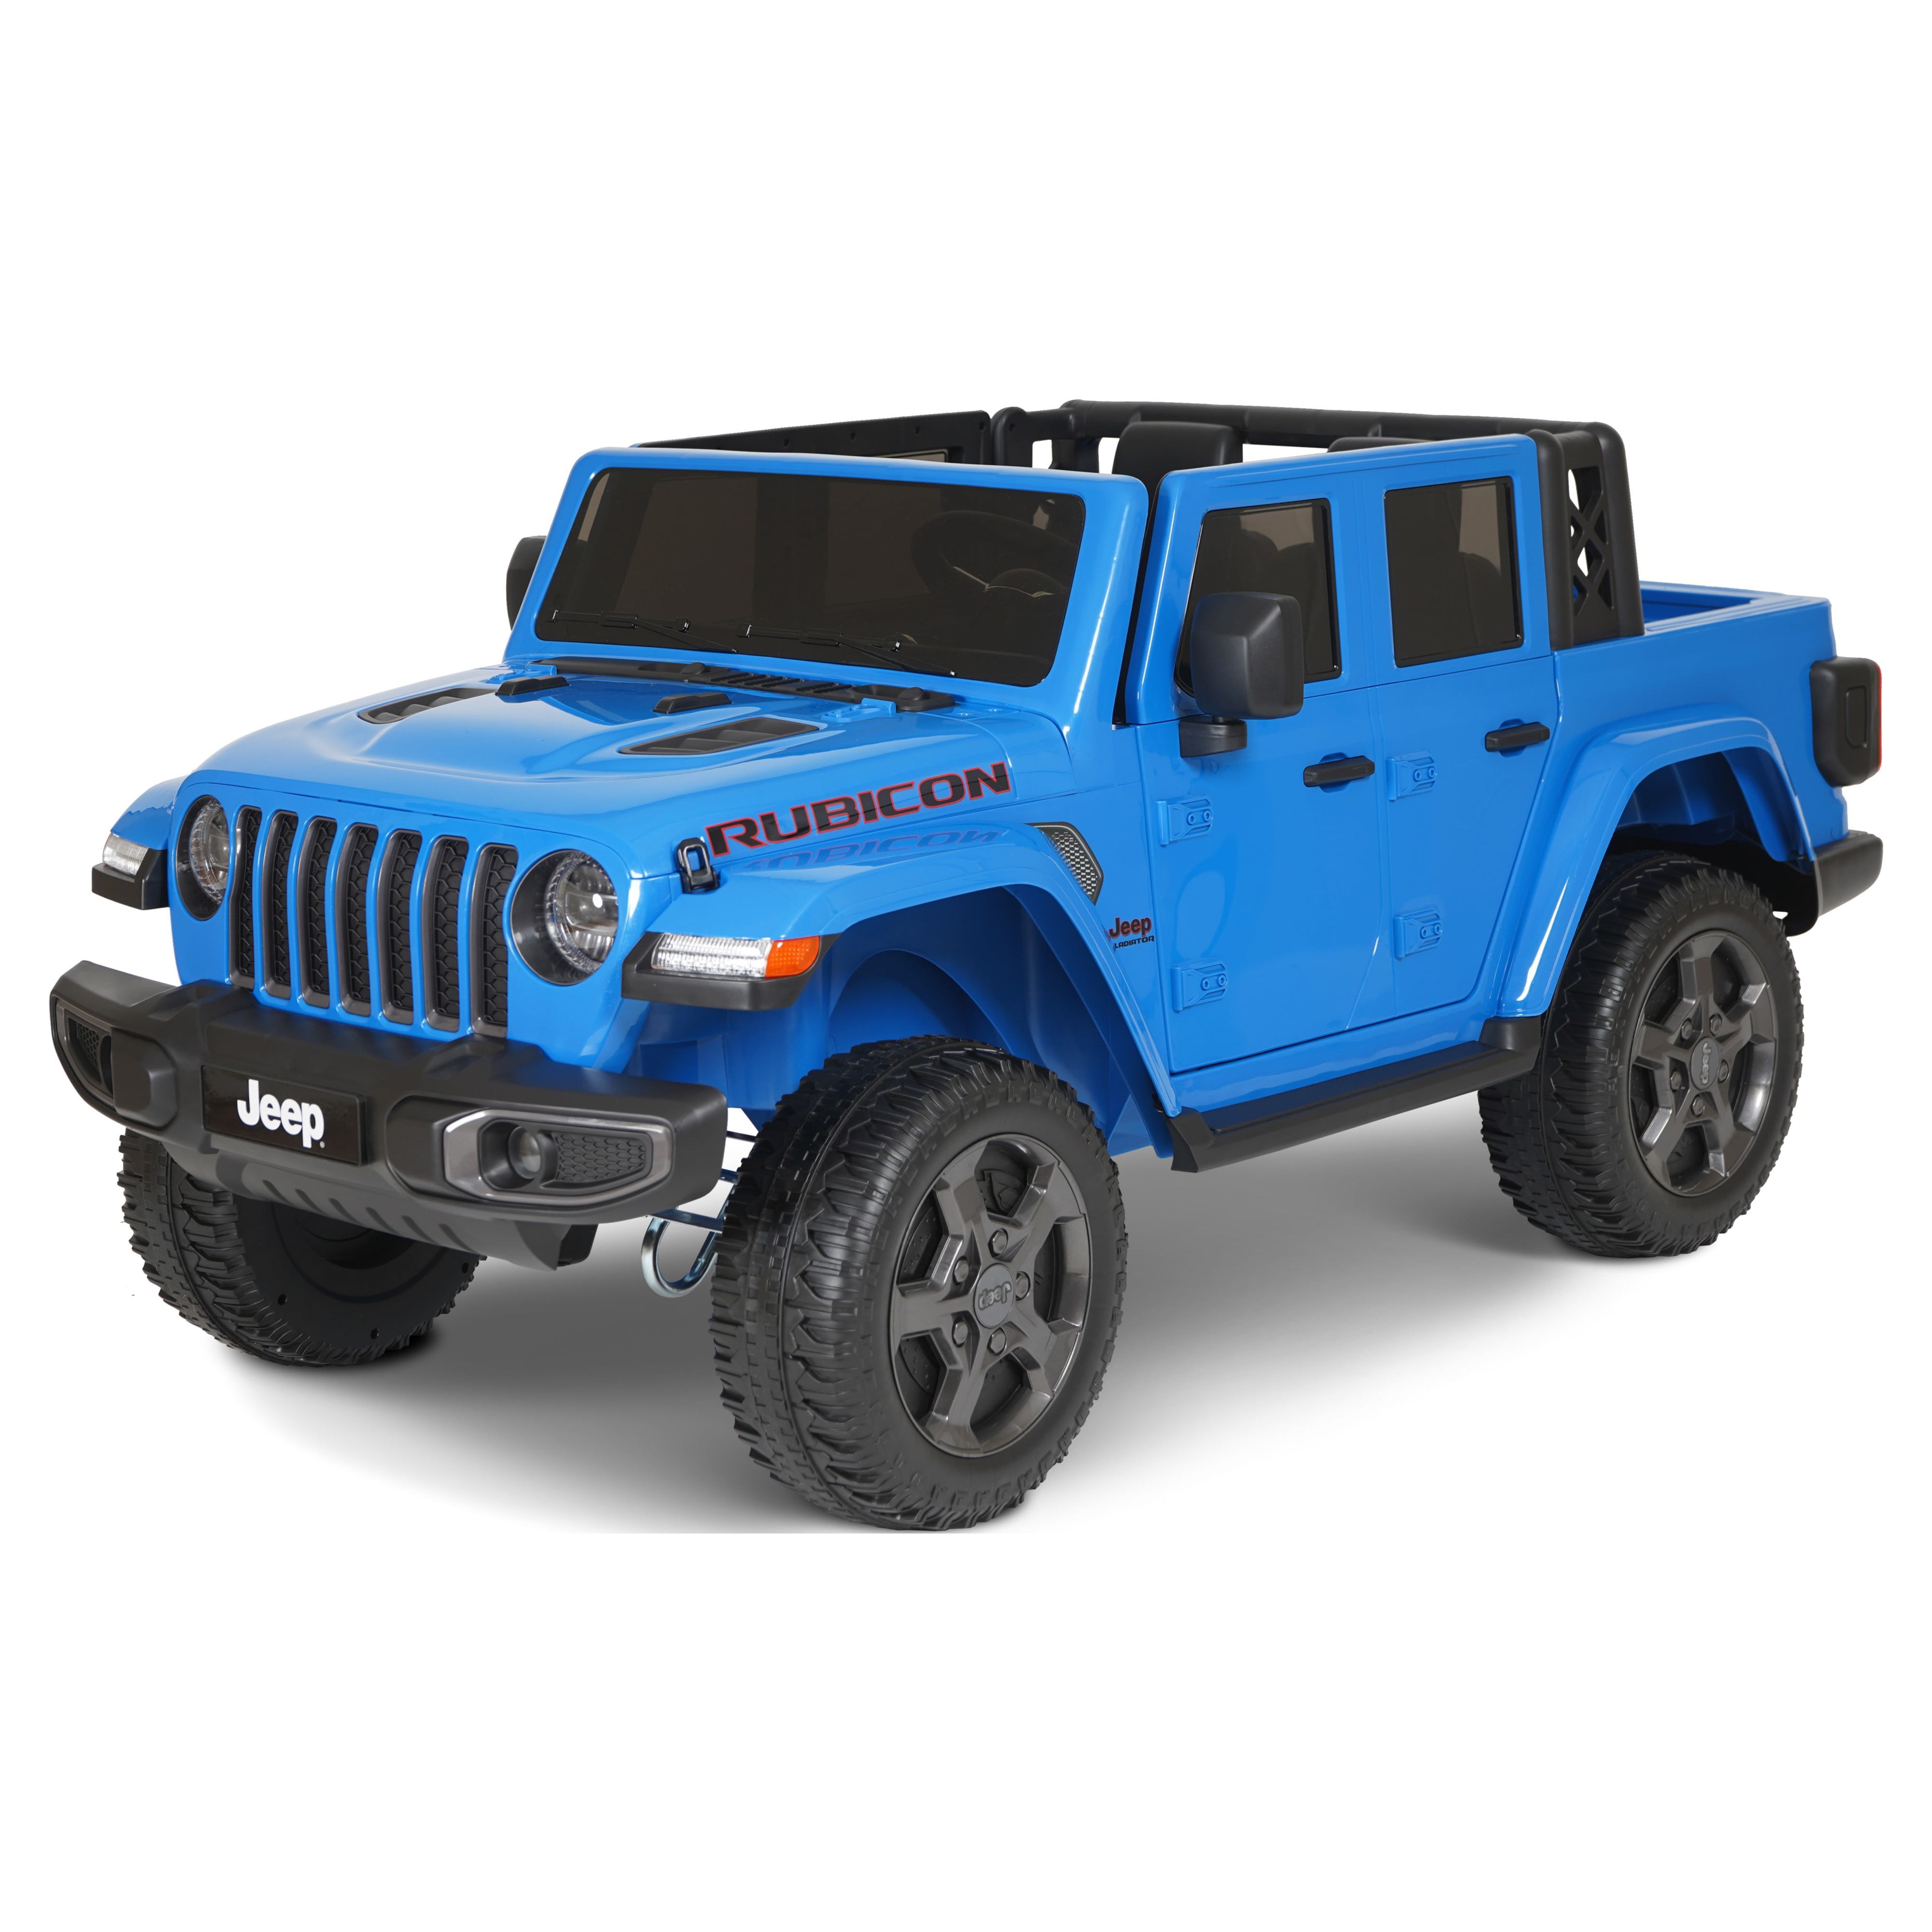 12V Jeep Gladiator Rubicon Battery Powered Ride-on by Hyper Toys, 2-Seater, Blue, for a Child Ages 3-8, Max Speed 5 mph - image 3 of 18